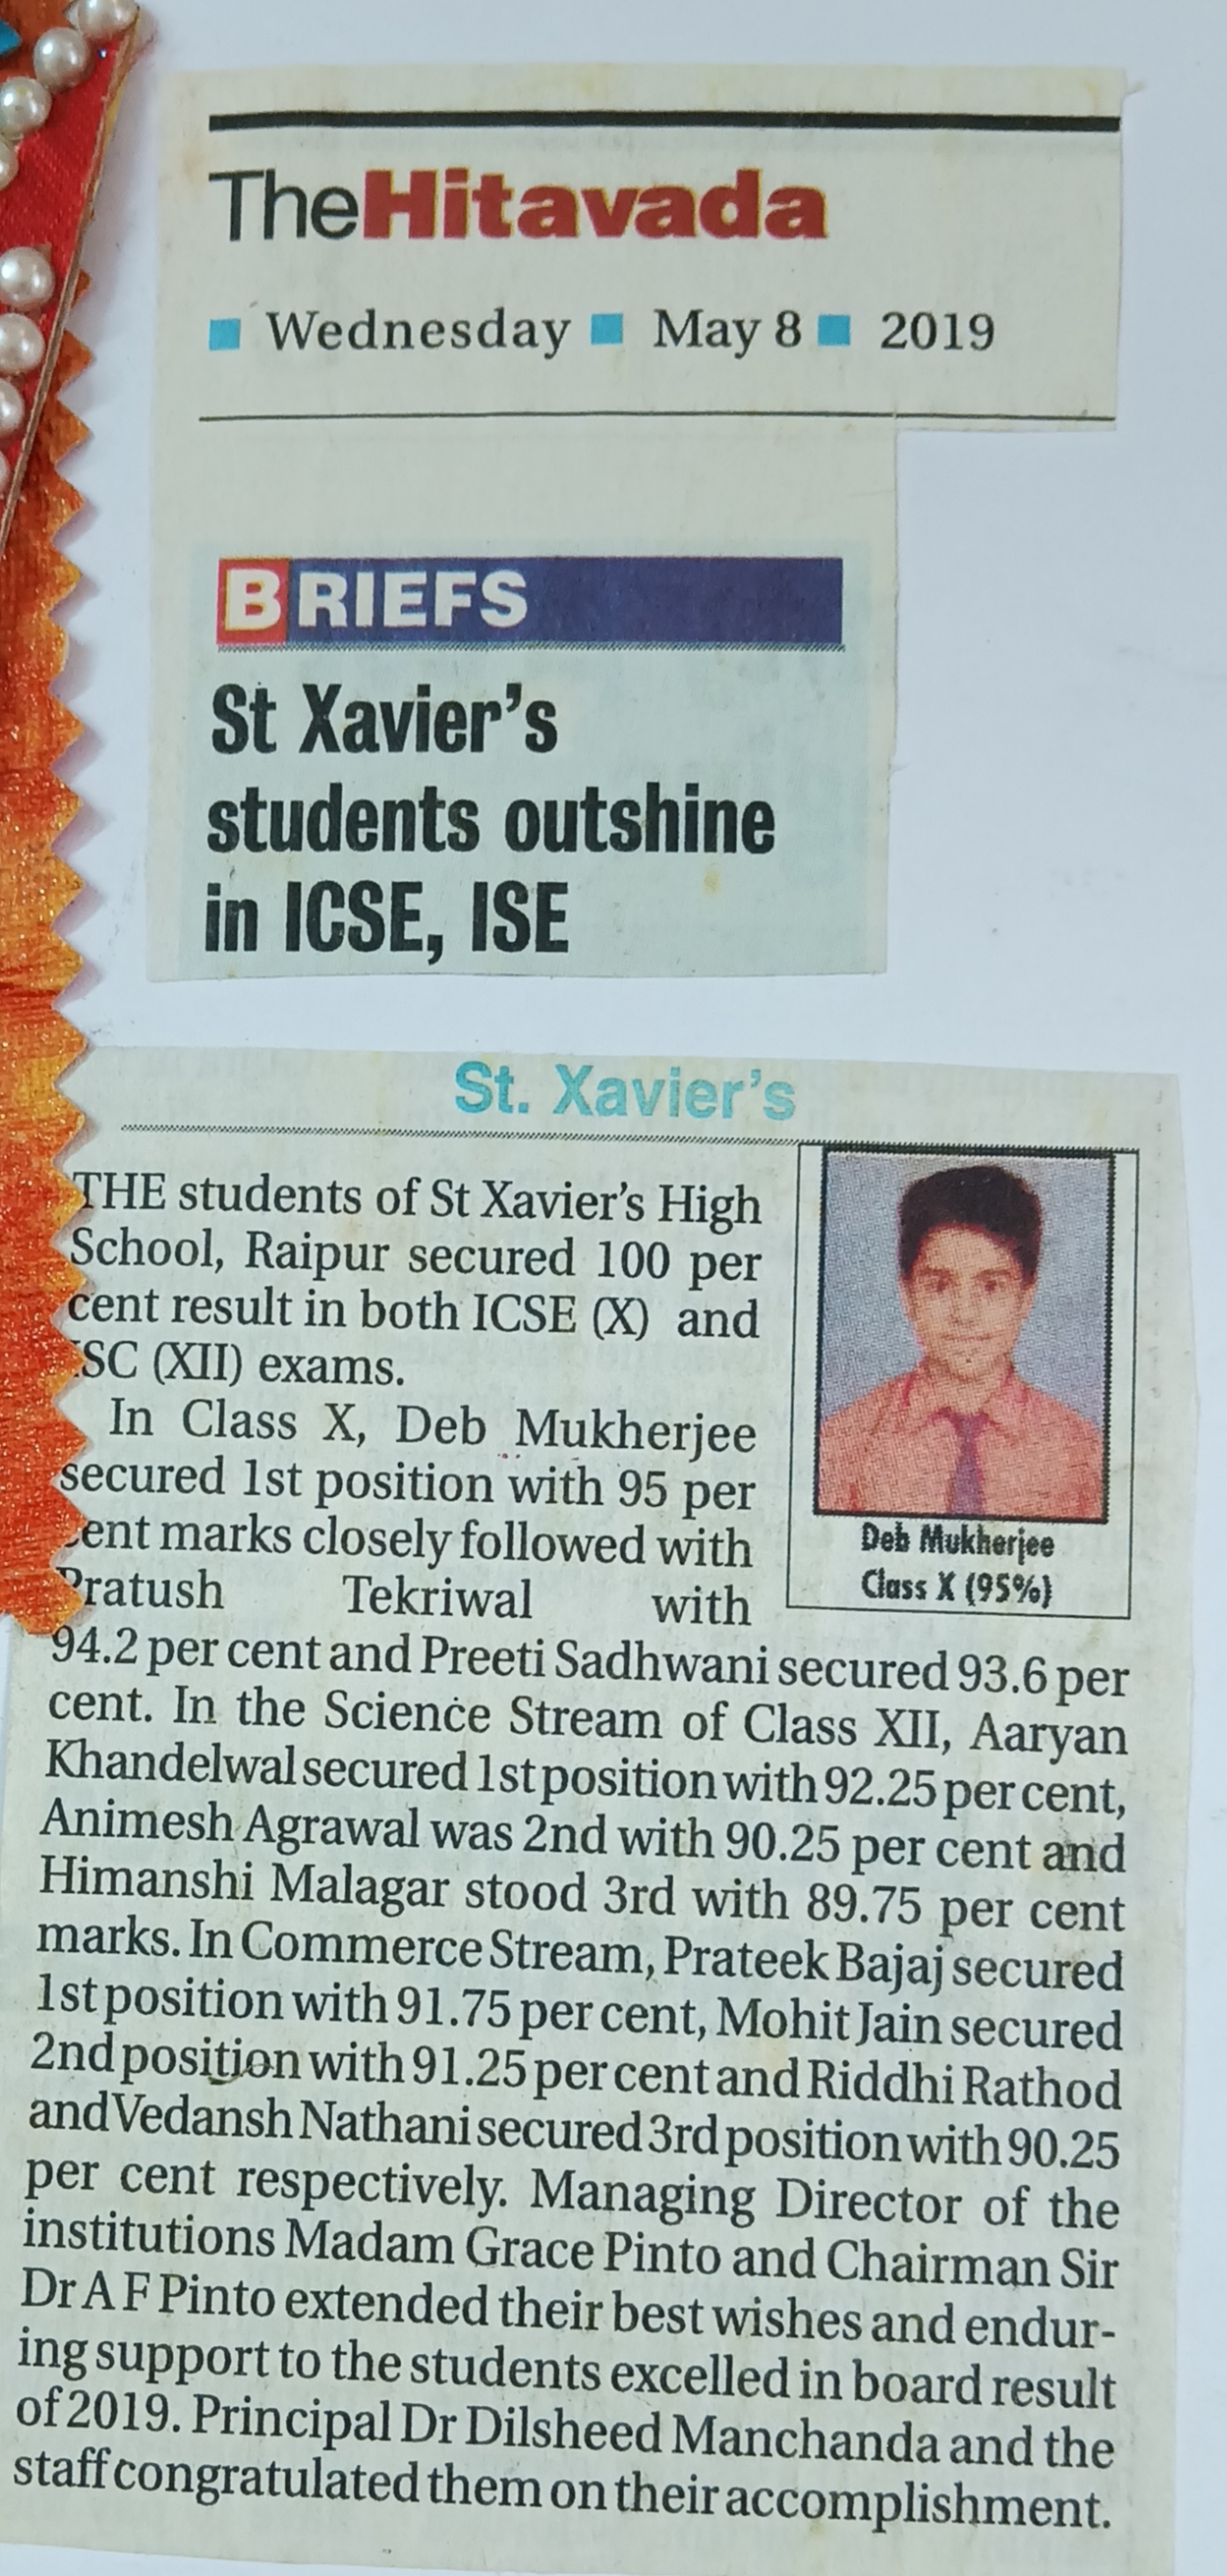 St. Xavier's students outshine In ICSE, ISE